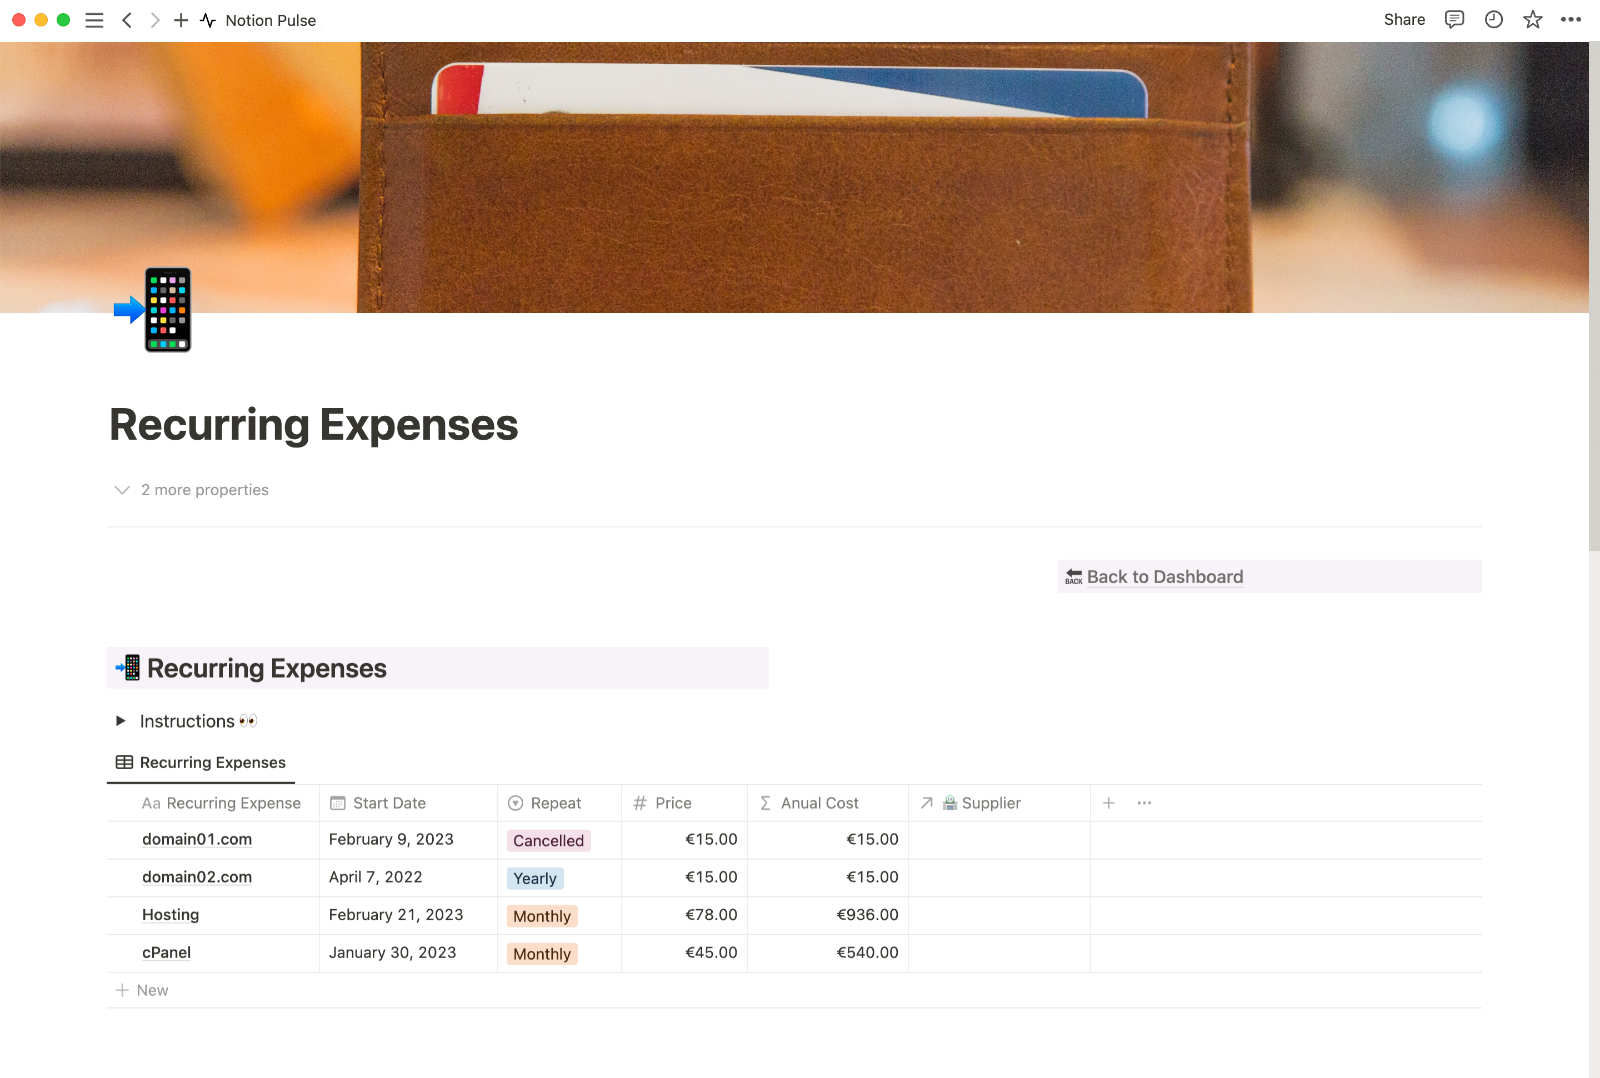 Notion Pulse Recurring Expenses